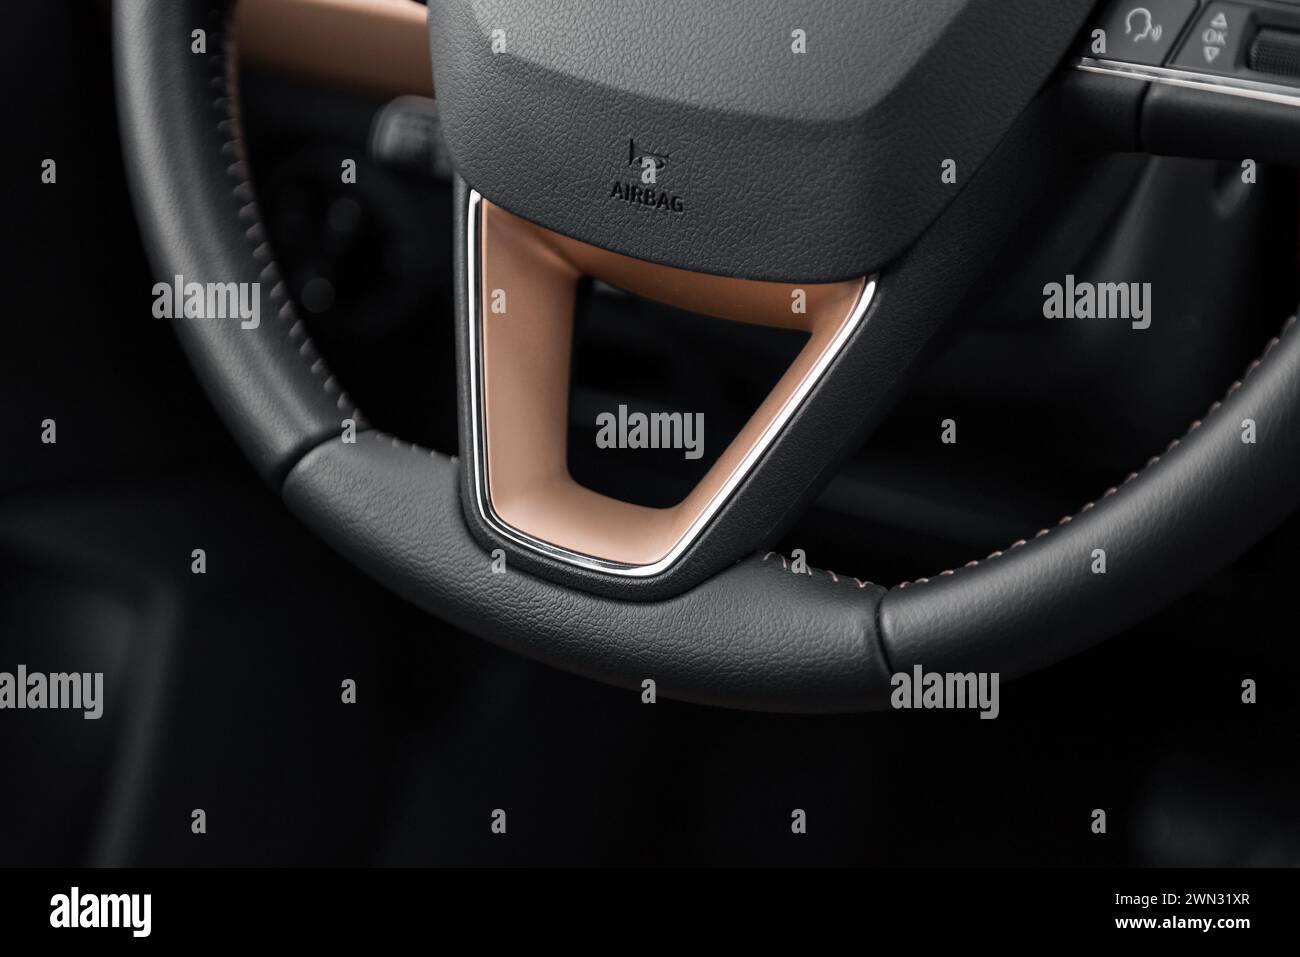 Bottom half of car steering wheel with copper elements. Leather steering wheel with beige stitching. Interior of modern compact car. Stock Photo